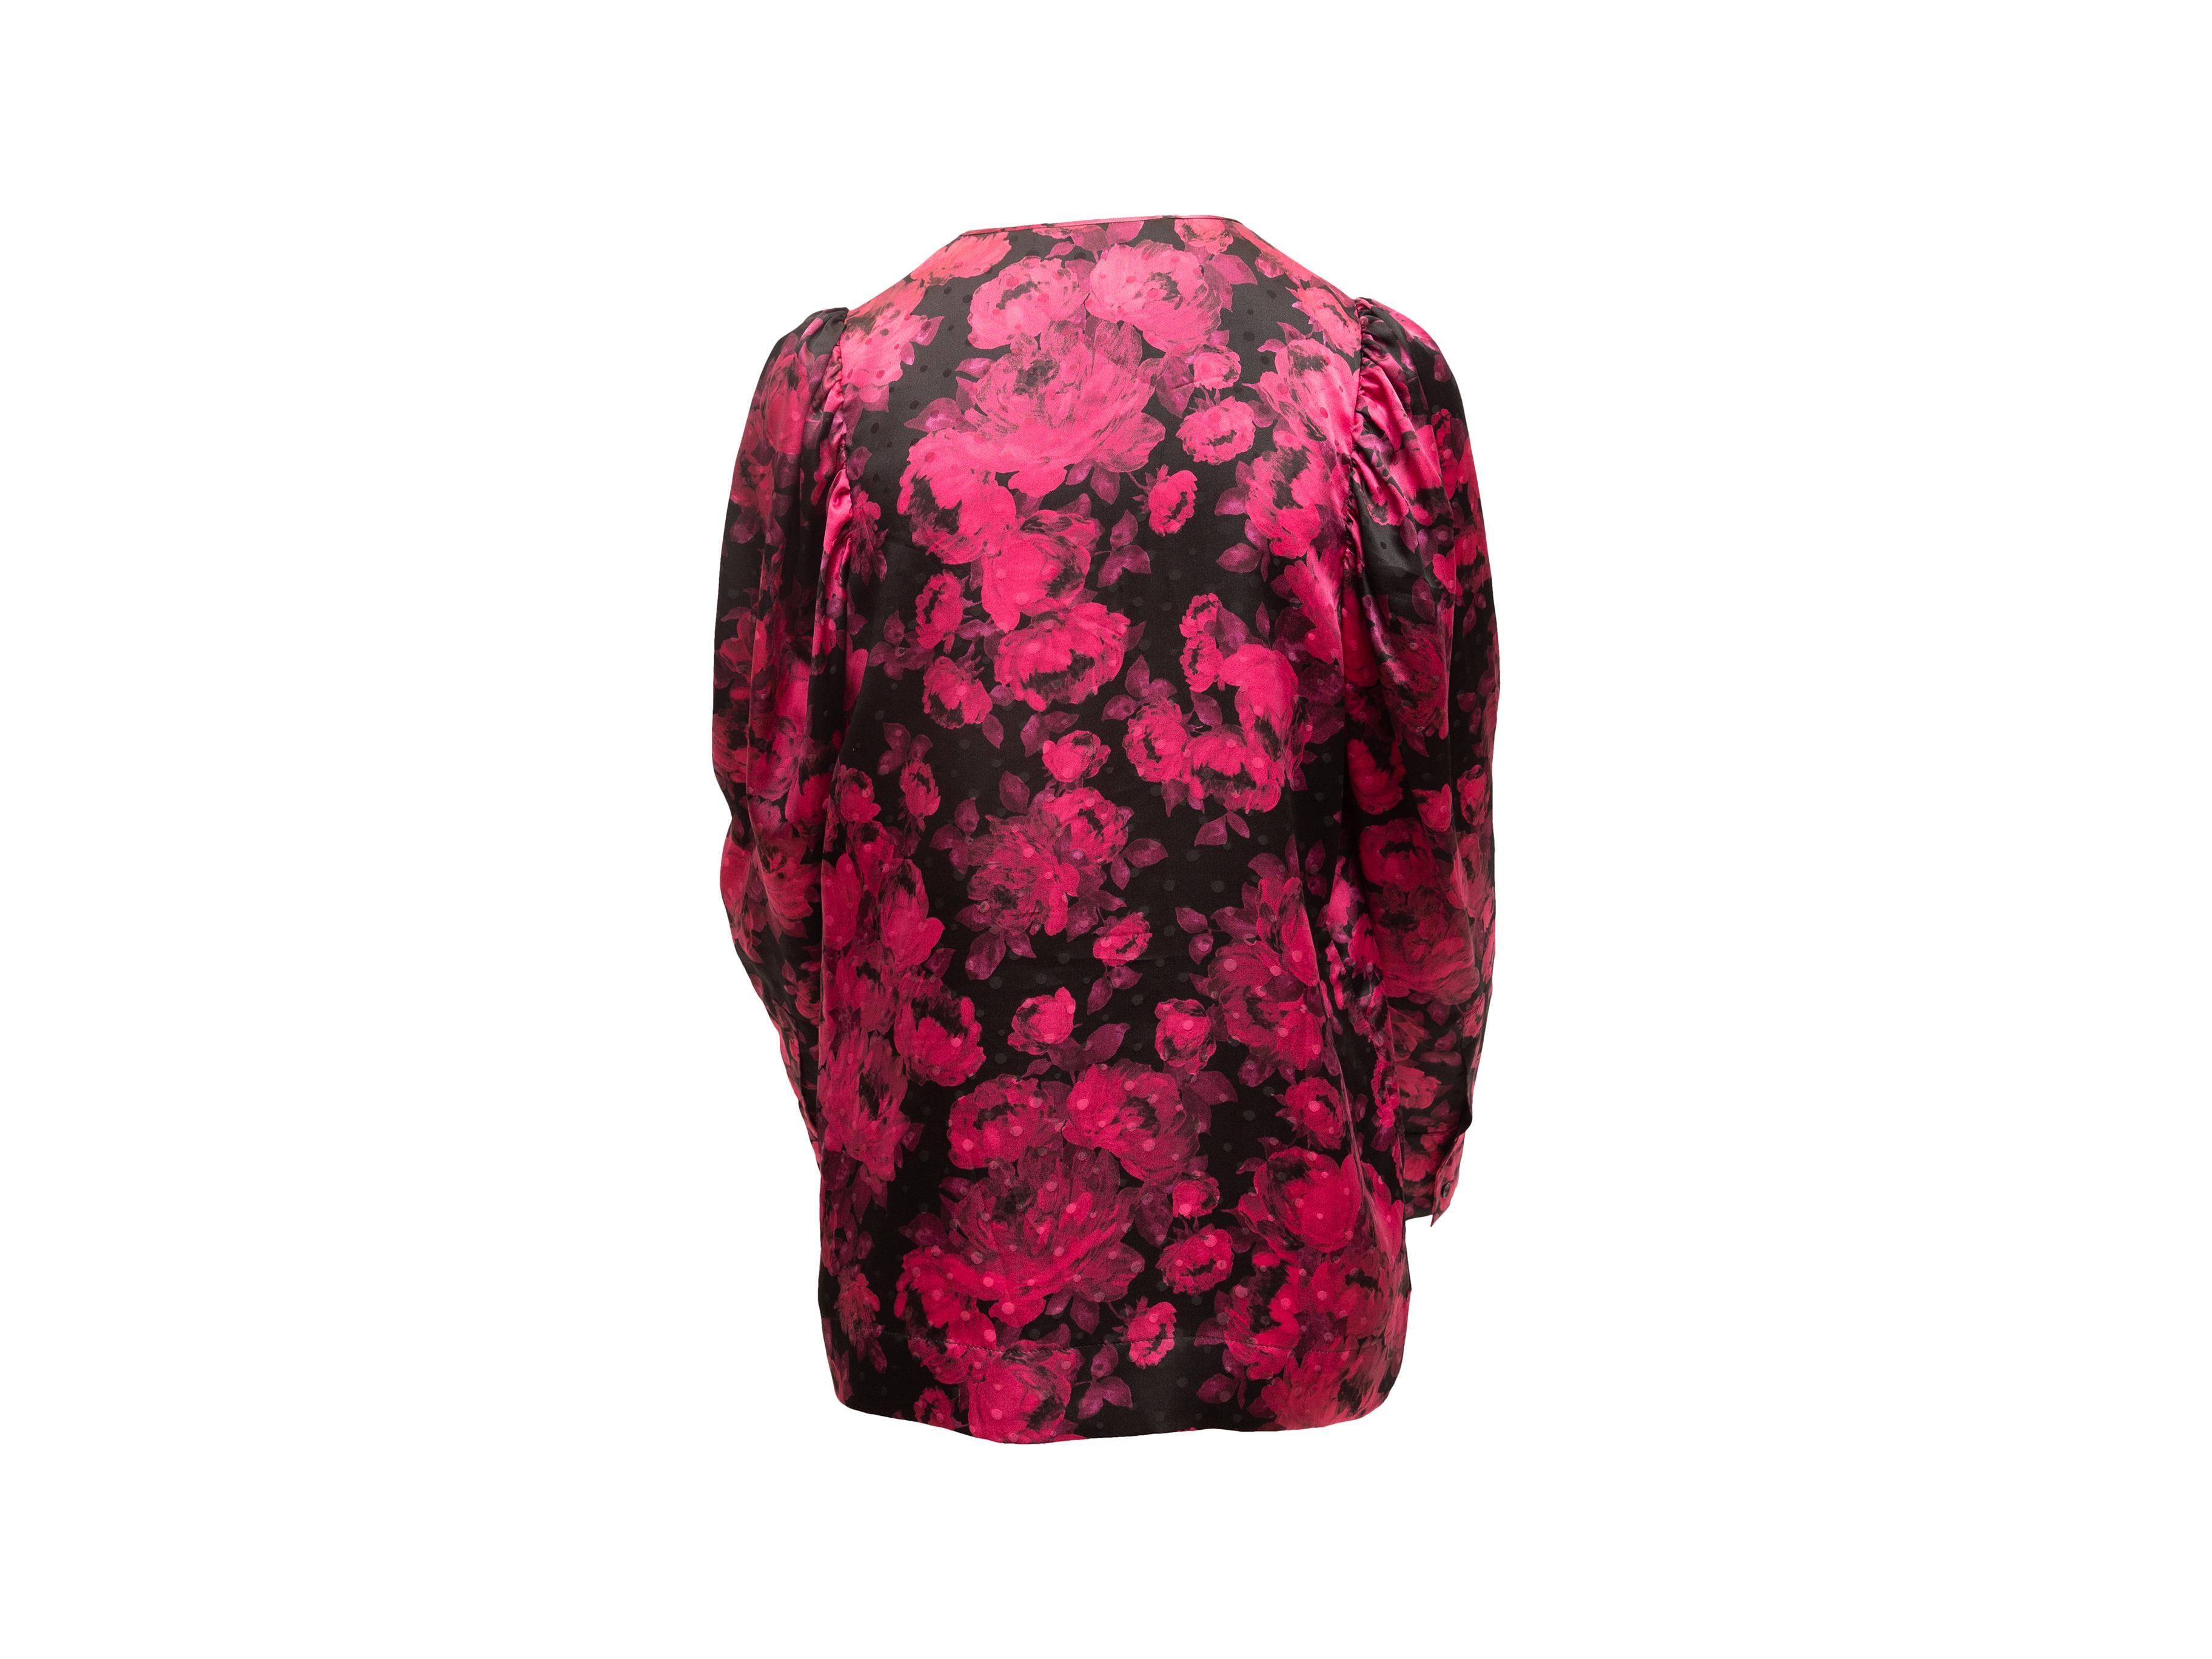 Product details: Pink and black silk long sleeve blouse by Stella McCartney. Floral print throughout. Crew neck. Button closures at front. Designer size 44. 36